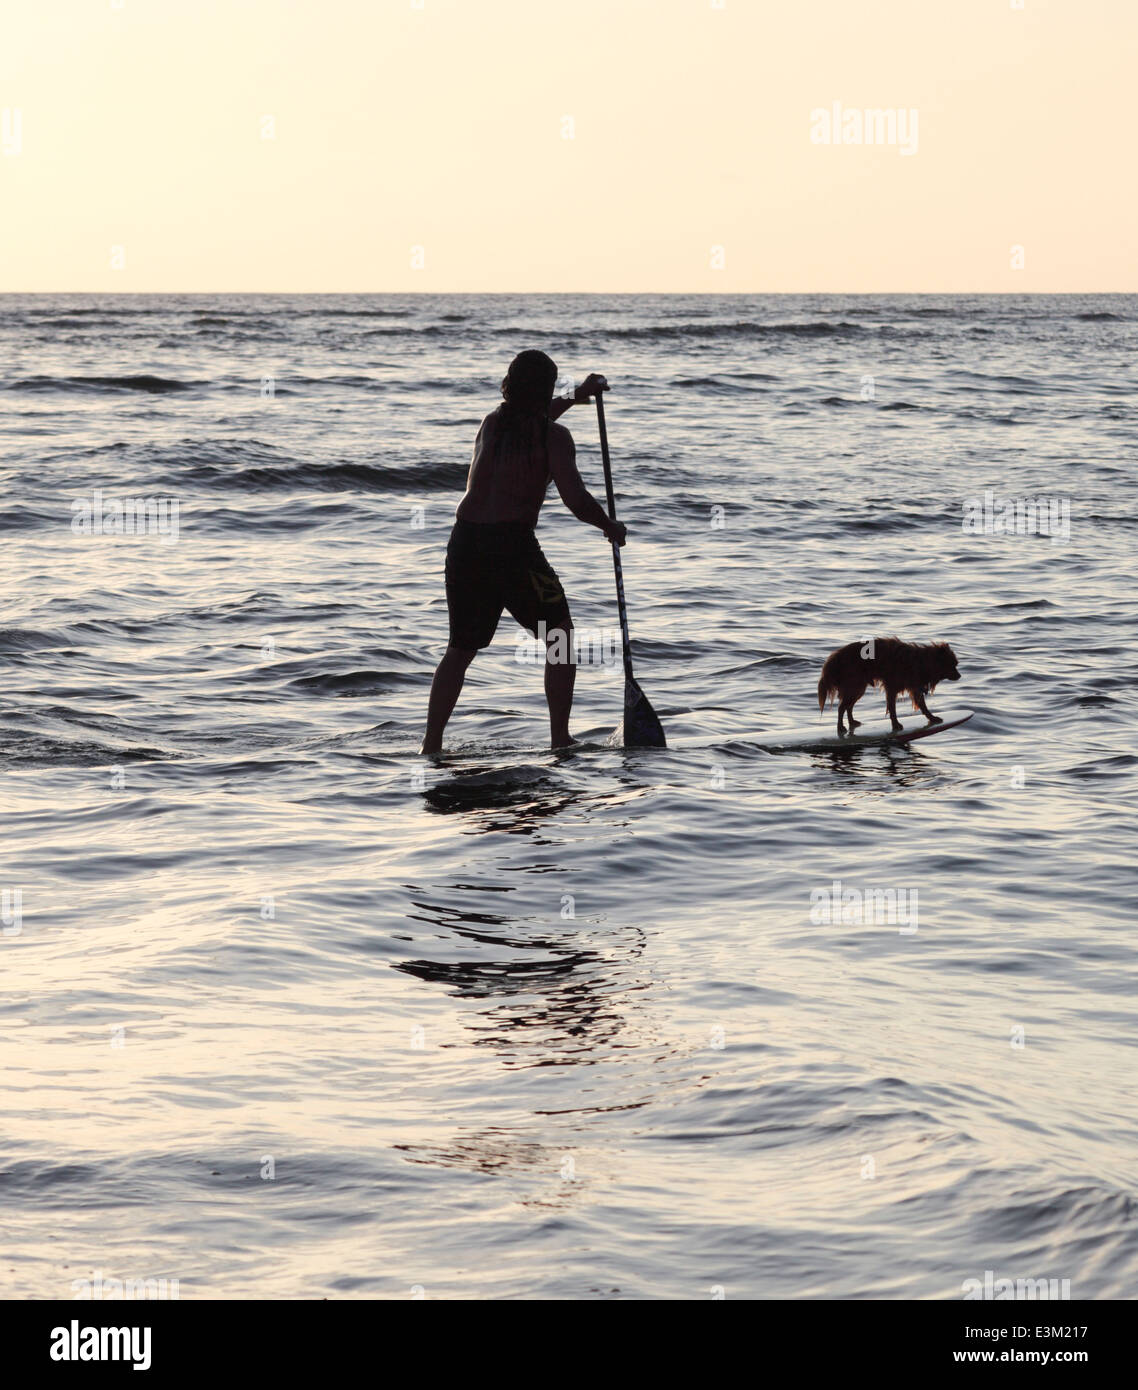 Dog goes stand up paddle surfing with owner in Hanalei, Kauai at sunset Stock Photo